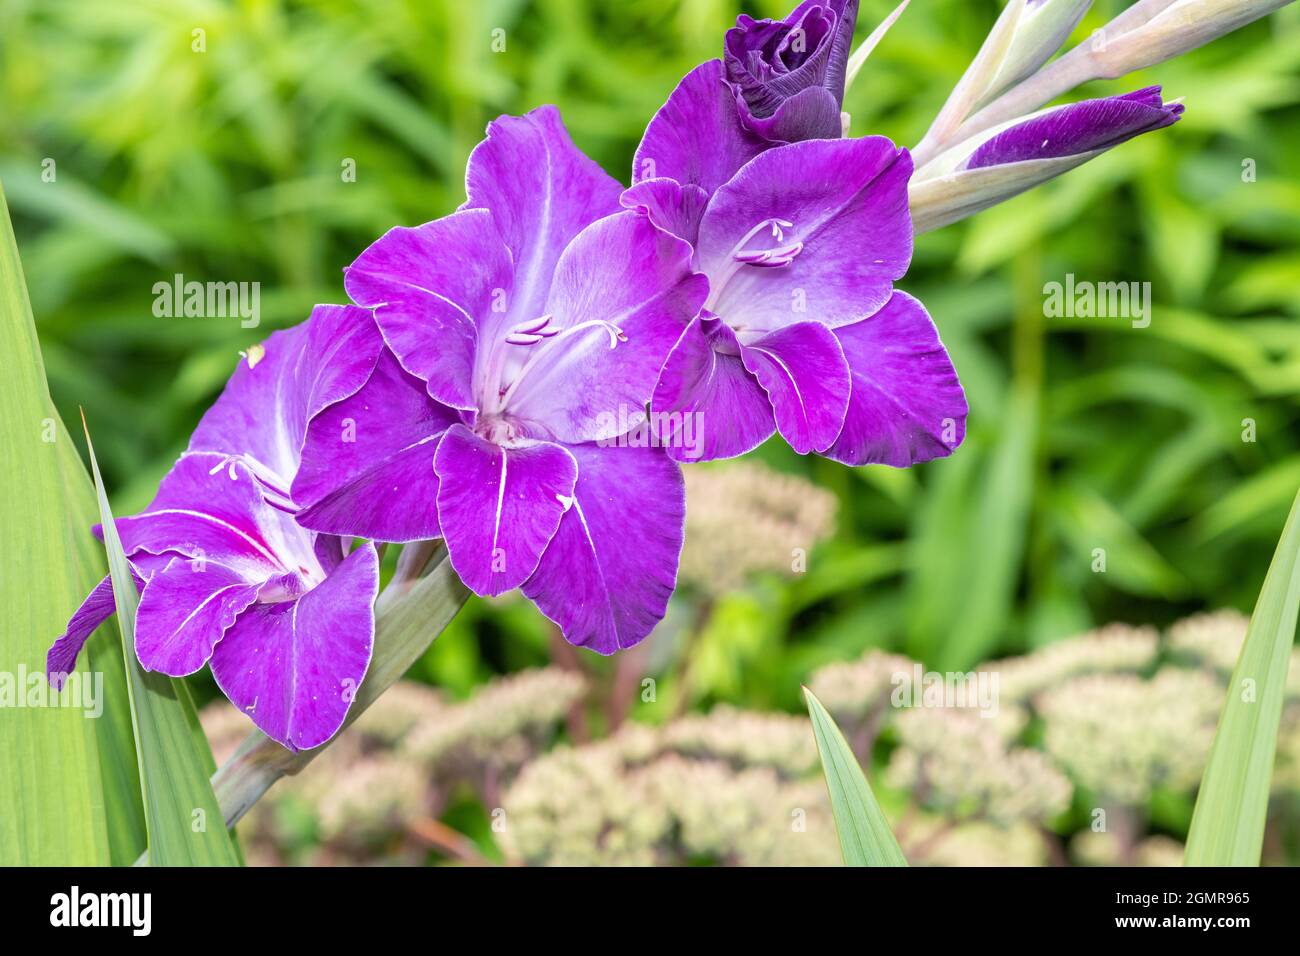 Close up of purple gladiolus flowers in bloom Stock Photo